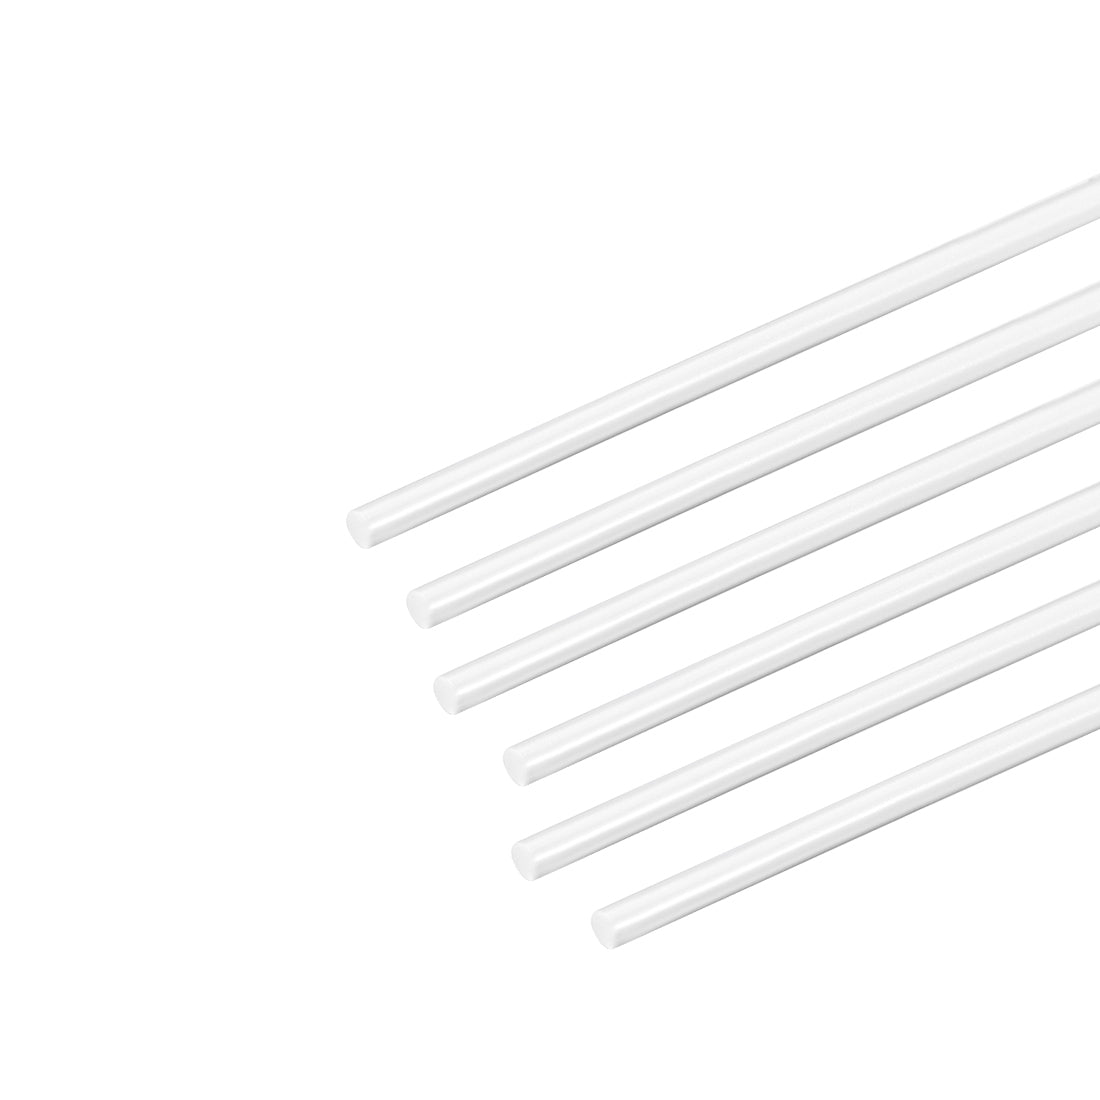 uxcell Uxcell 1.5mm × 20" ABS Plastic Round Bar Rod for Architectural Model Making DIY 6pcs